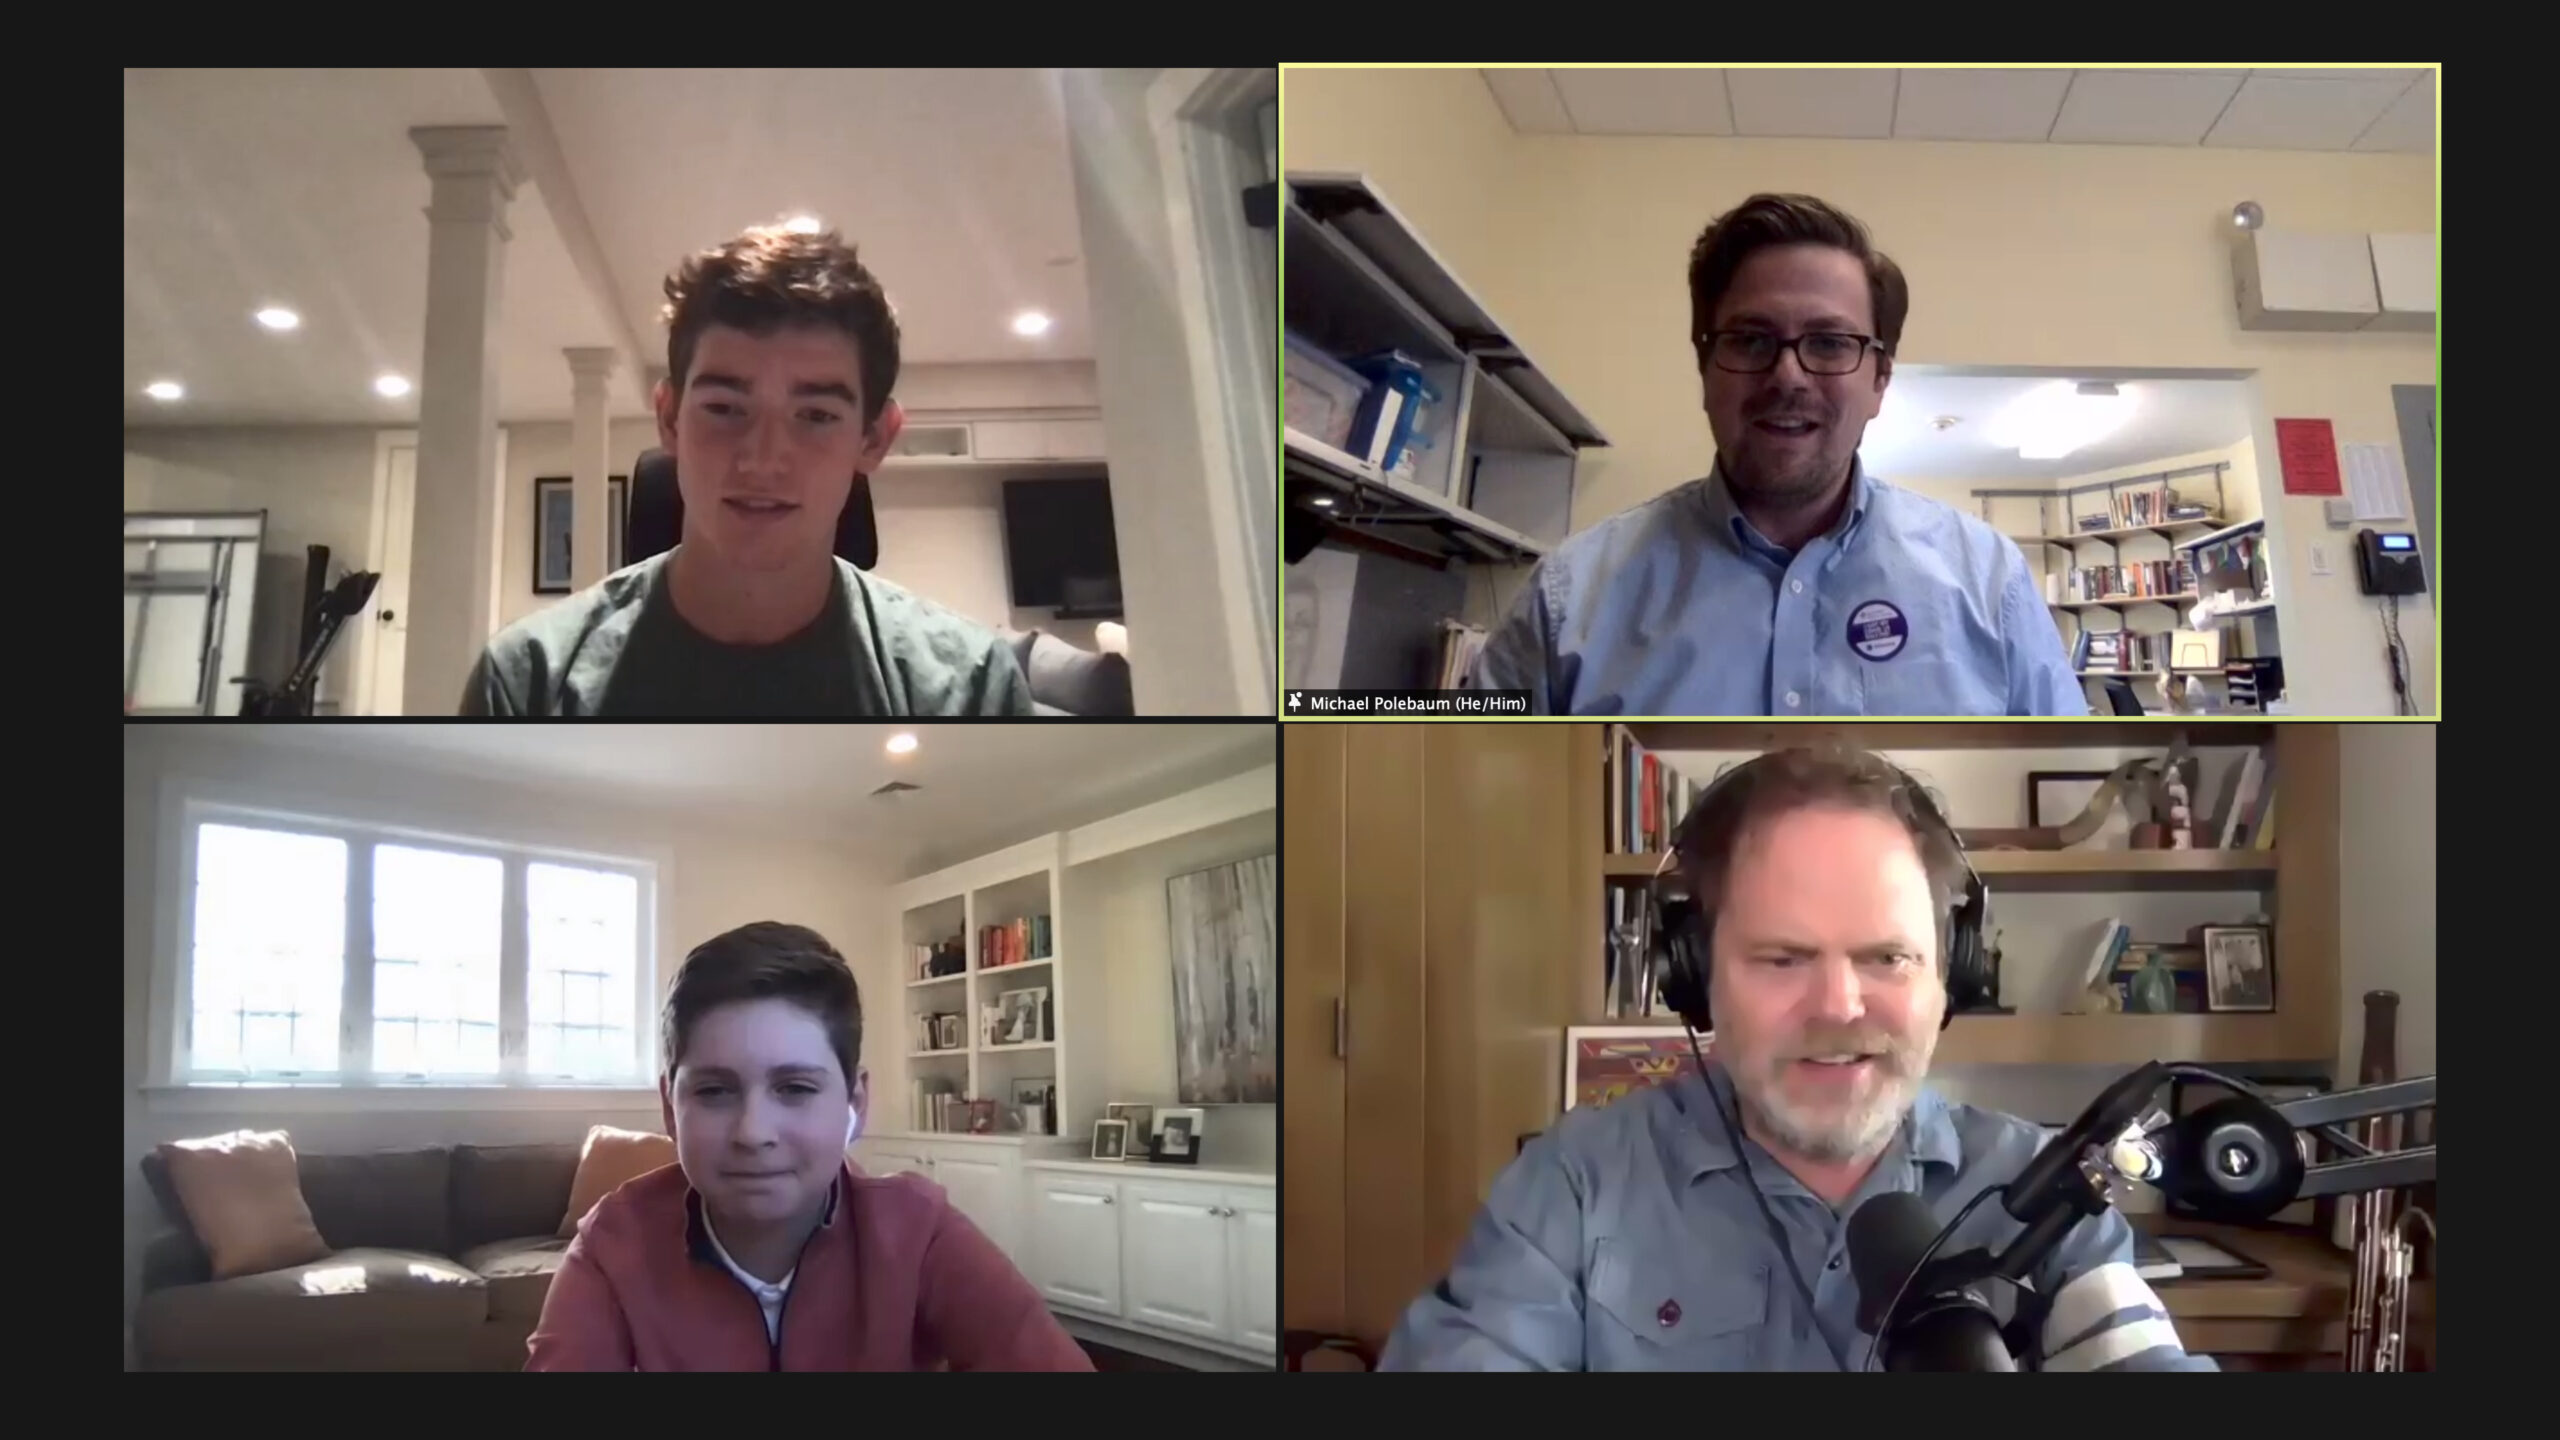 Rainn Wilson, Michael Polebaum, Oliver Burstein and James O'Connor during Zoom assembly on APril 14, 2021